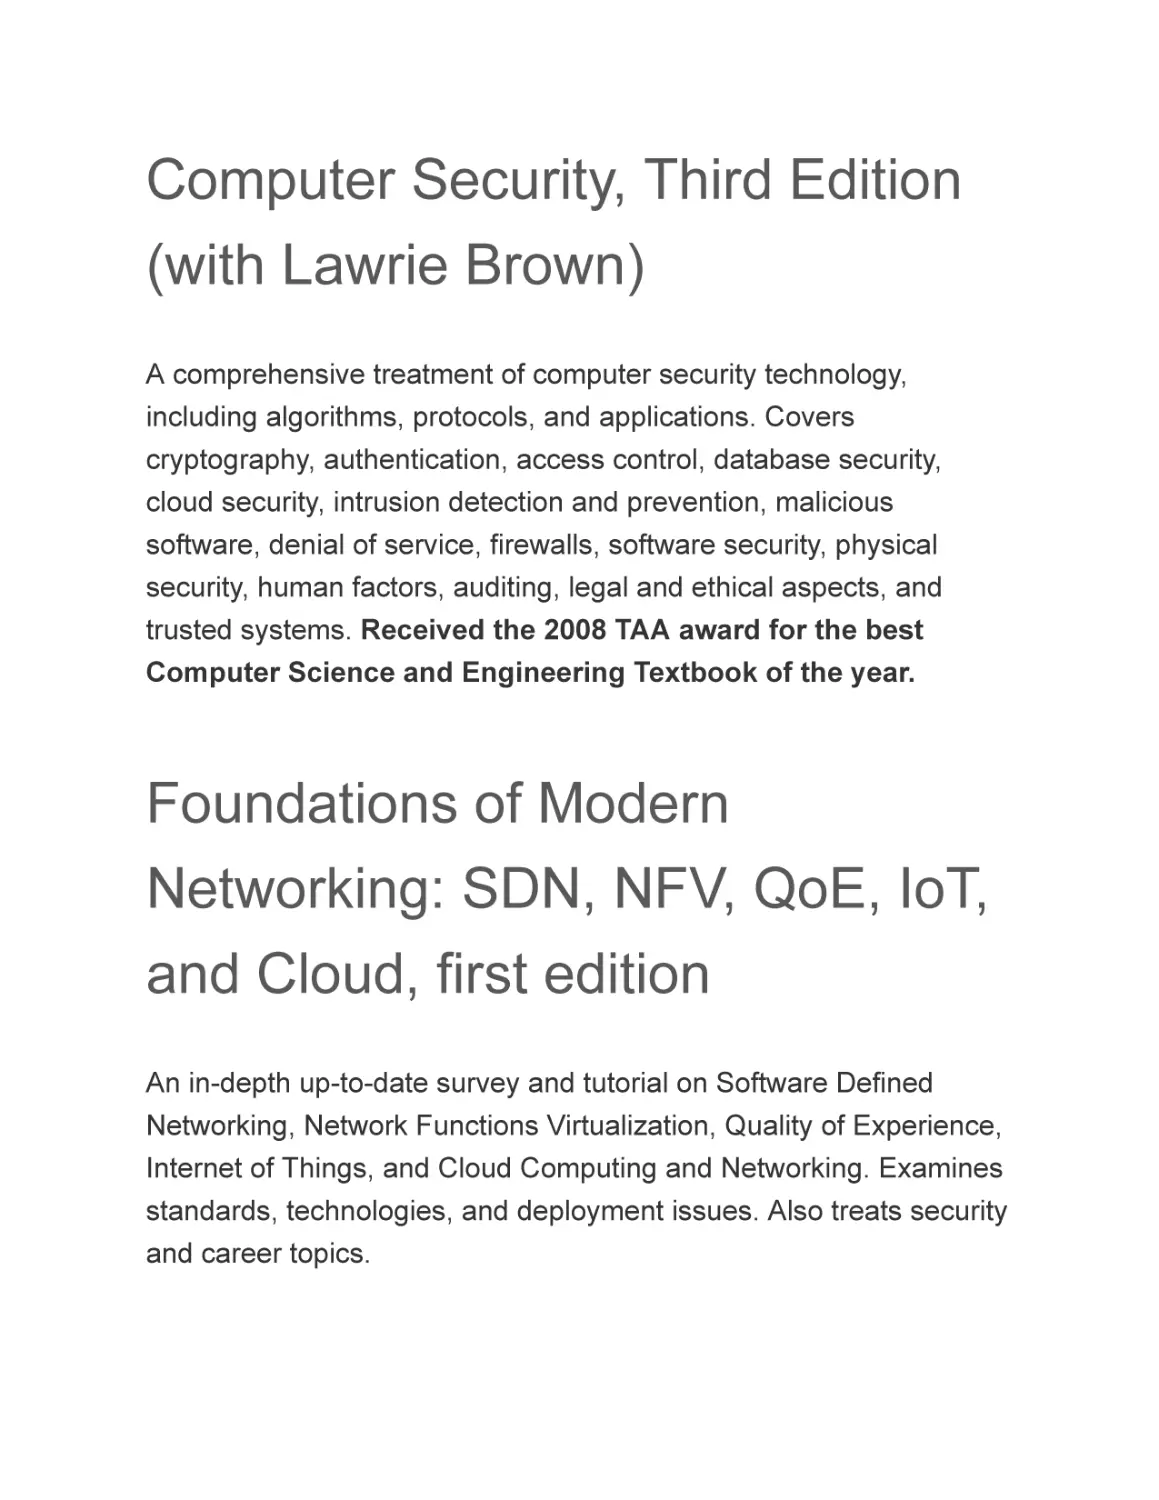 Computer Security, Third Edition (with Lawrie Brown)
Foundations of Modern Networking